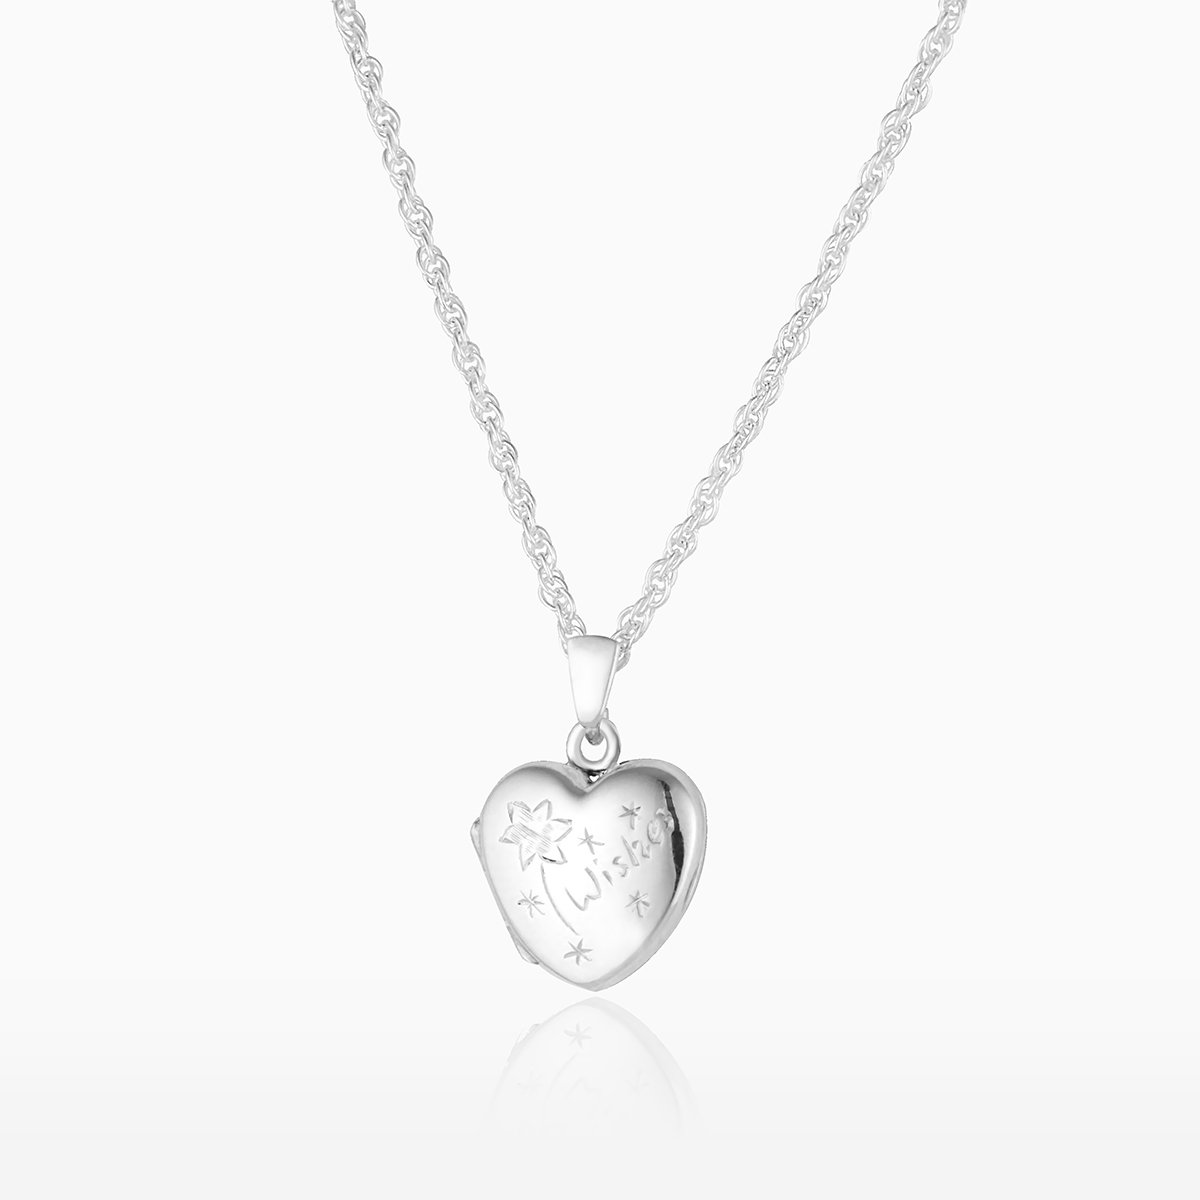 Product title: Silver Child's Wishes Locket, product type: Locket